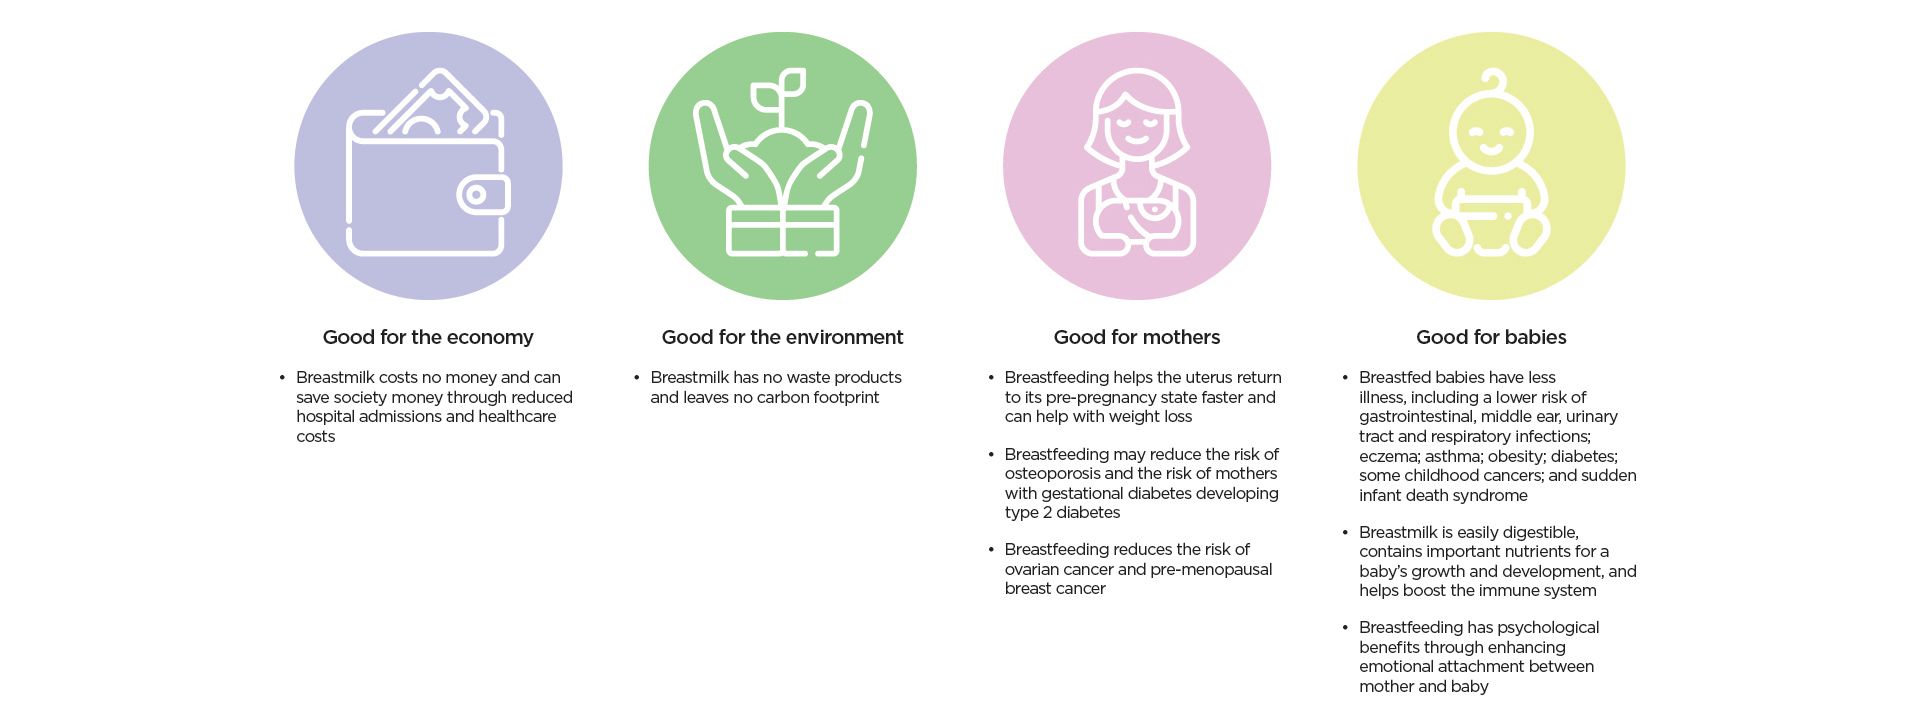 Infographic that says, 'Breastfeeding is good for the economy, the environment, for mothers and for babies'.